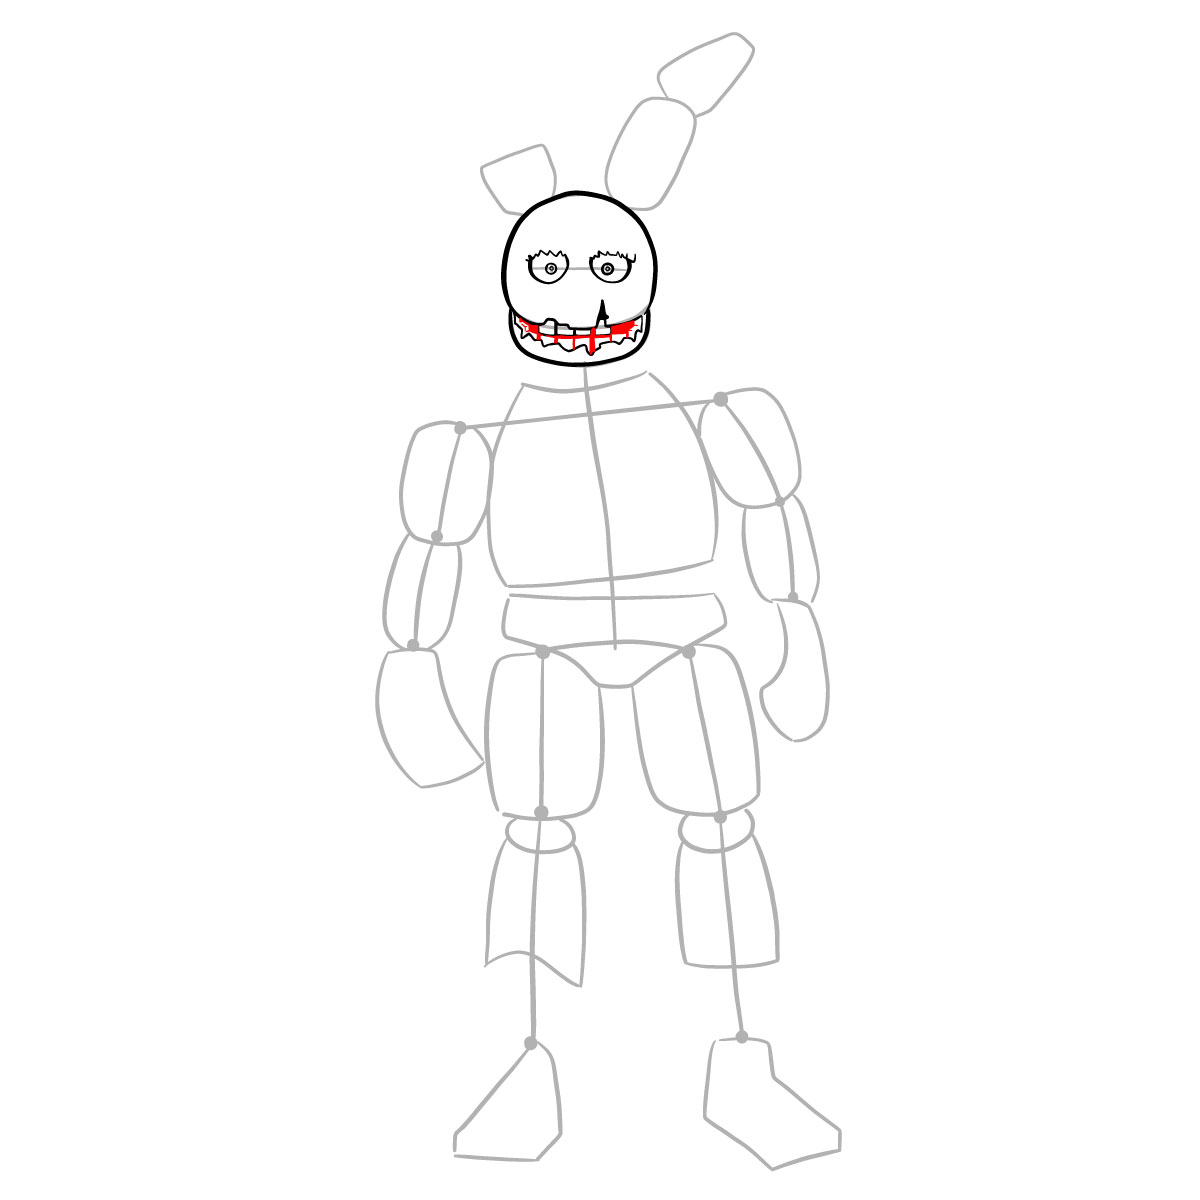 How to draw Springtrap from FNAF 3 - step 10